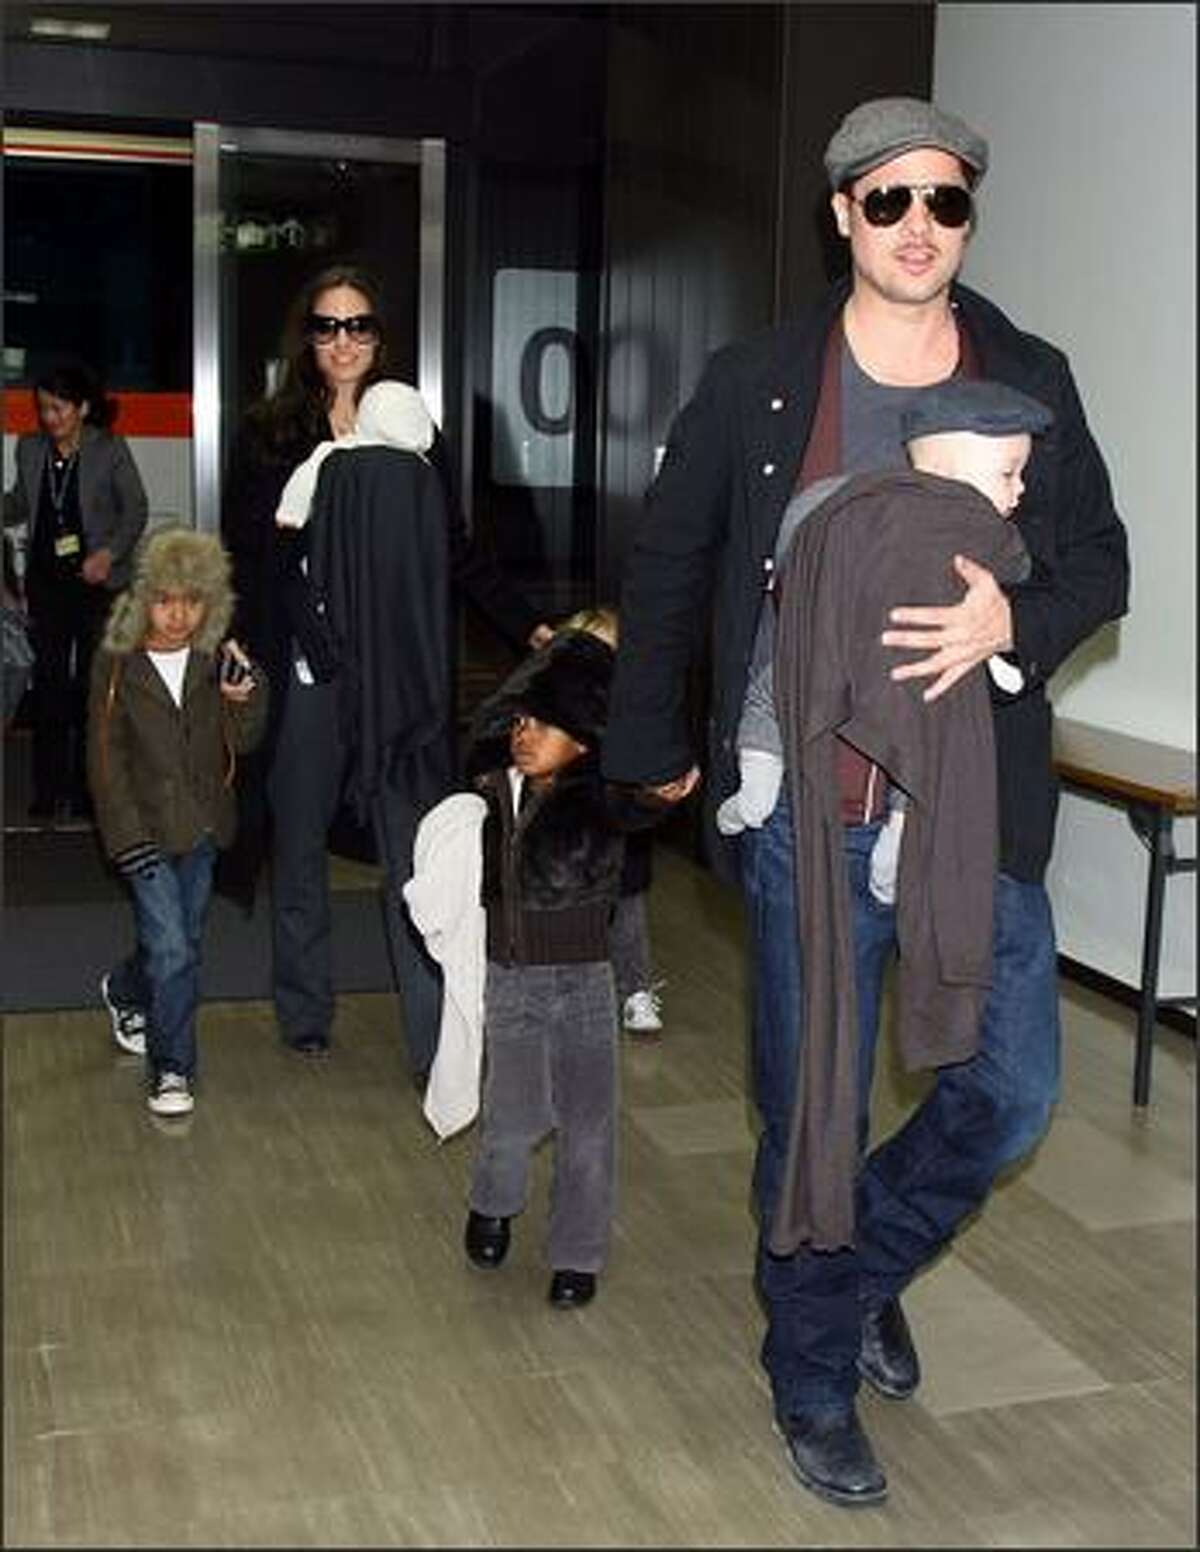 Actor Brad Pitt and Angelina Jolie arrive at Narita International Airport with their children (L to R) Maddox, Vivienne, Zahara and Knox in Narita, Chiba, Japan. Brad is visiting Japan to promote his film "The Curious Case Of Benjamin Button".